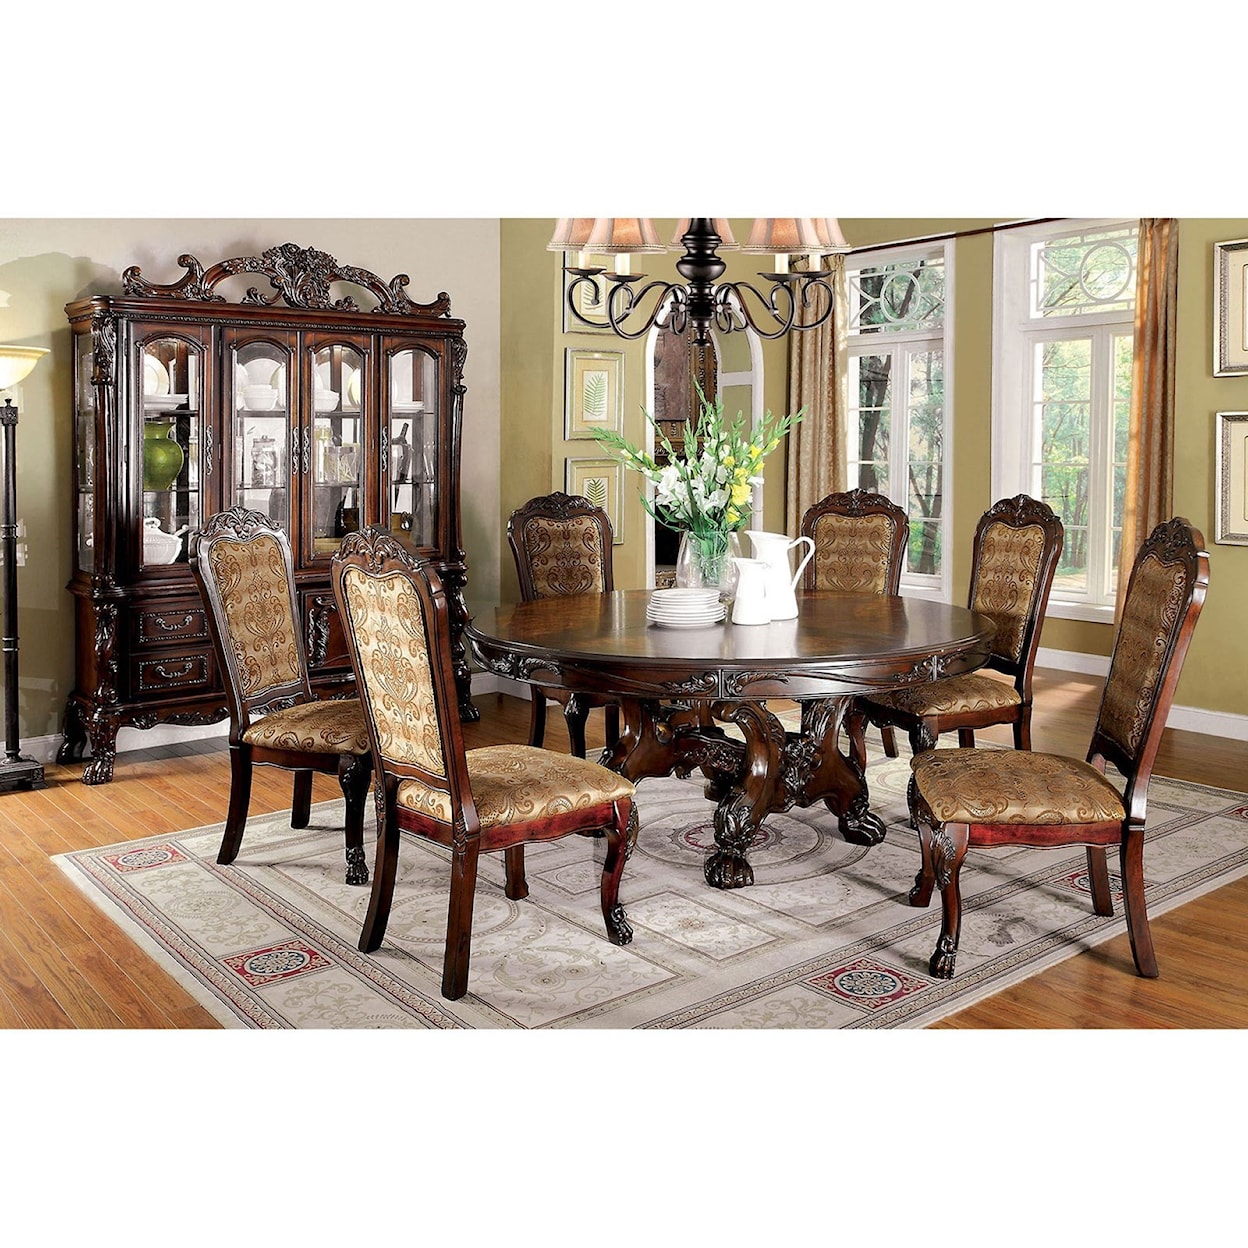 Furniture of America Medieve Round Dining Table